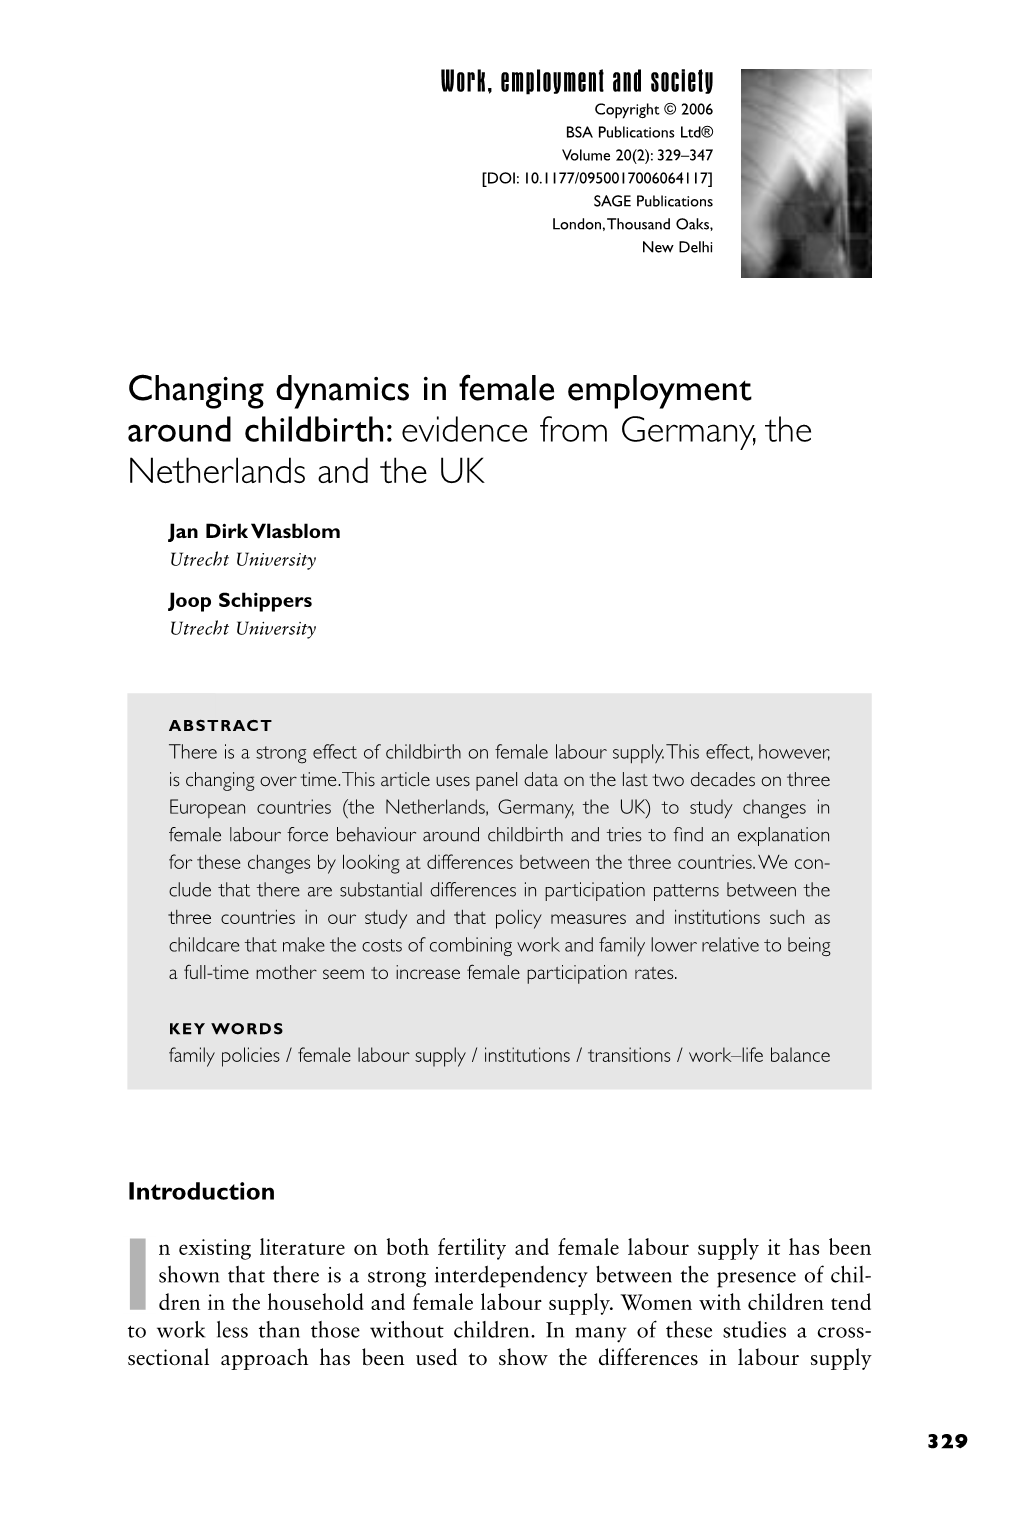 Changing Dynamics in Female Employment Around Childbirth: Evidence from Germany, the Netherlands and the UK